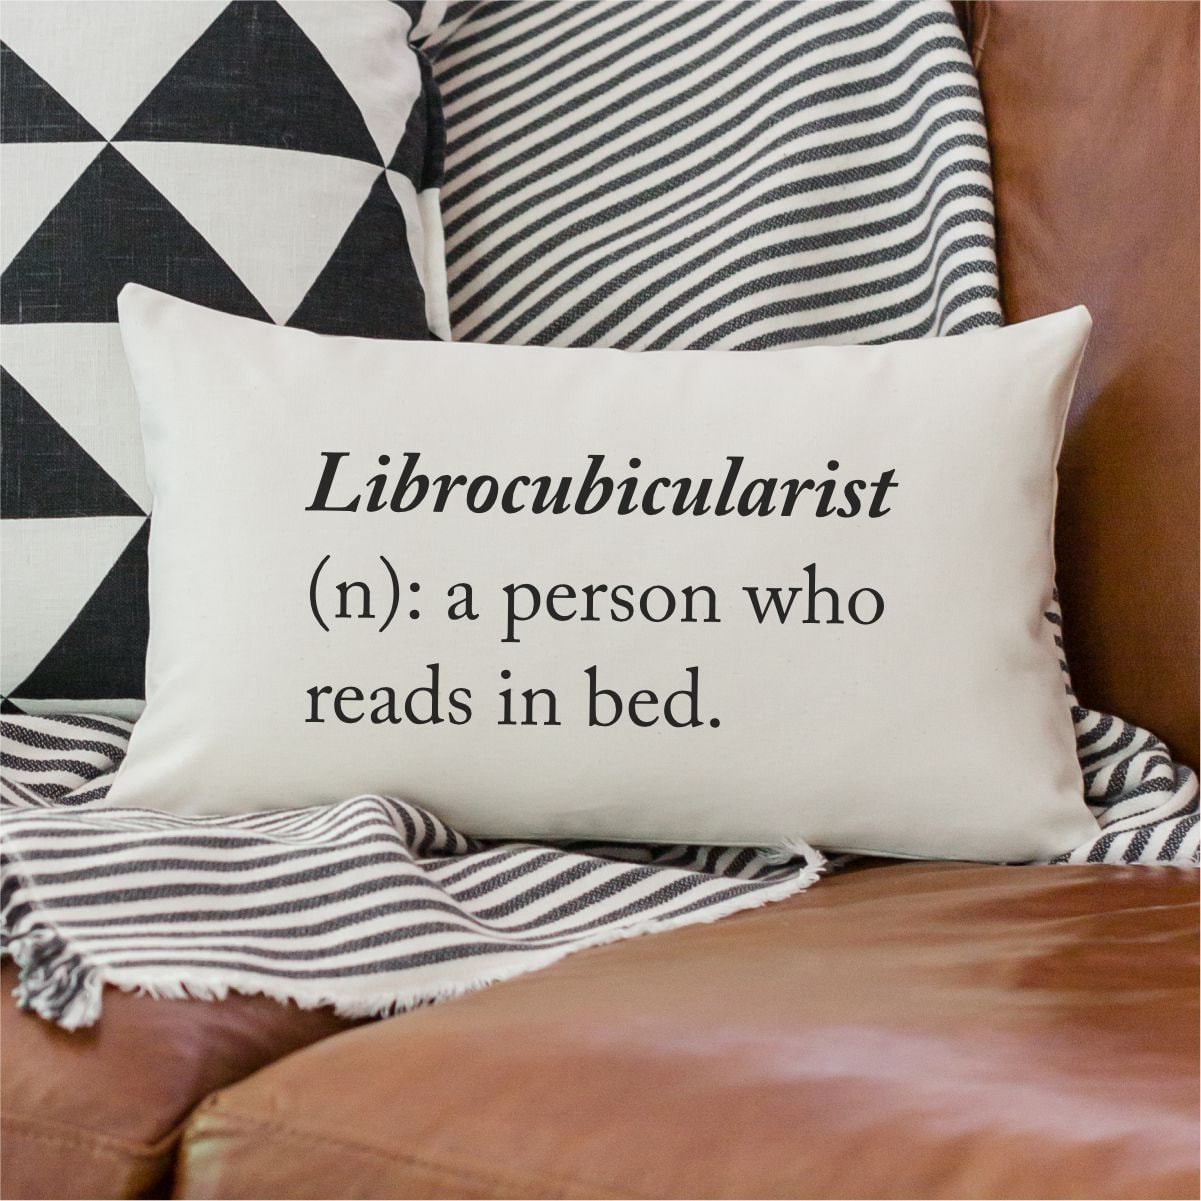 Funny Book Writer Gift Author Accessories & Stuff Cool Writer Art for Men  Women Novel Author Writing Novelist Throw Pillow, 16x16, Multicolor